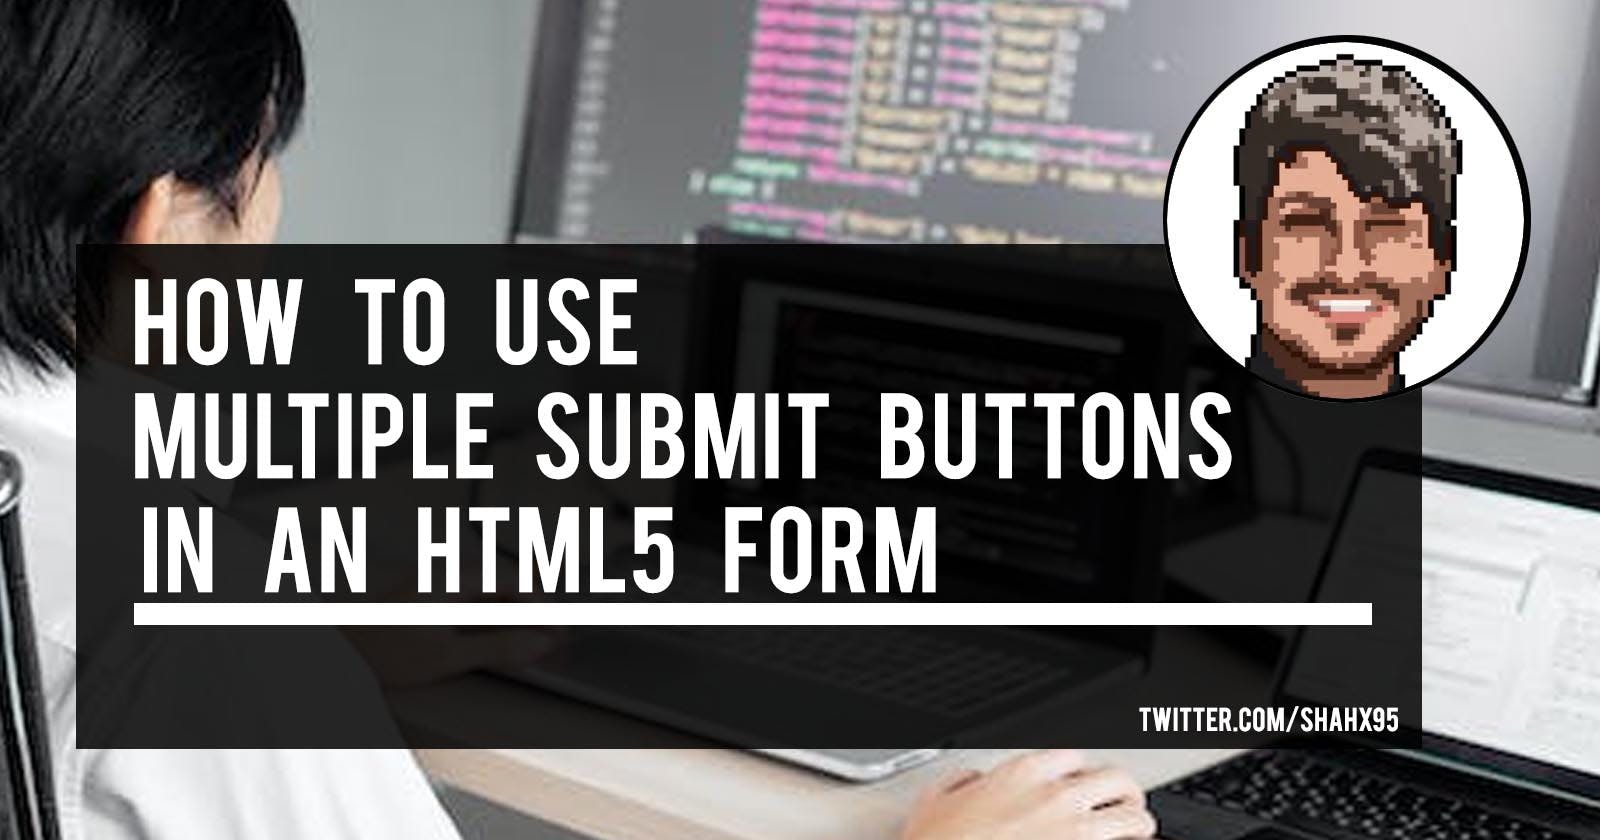 How To Use Multiple Submit Buttons In An HTML5 Form (No Javascript)